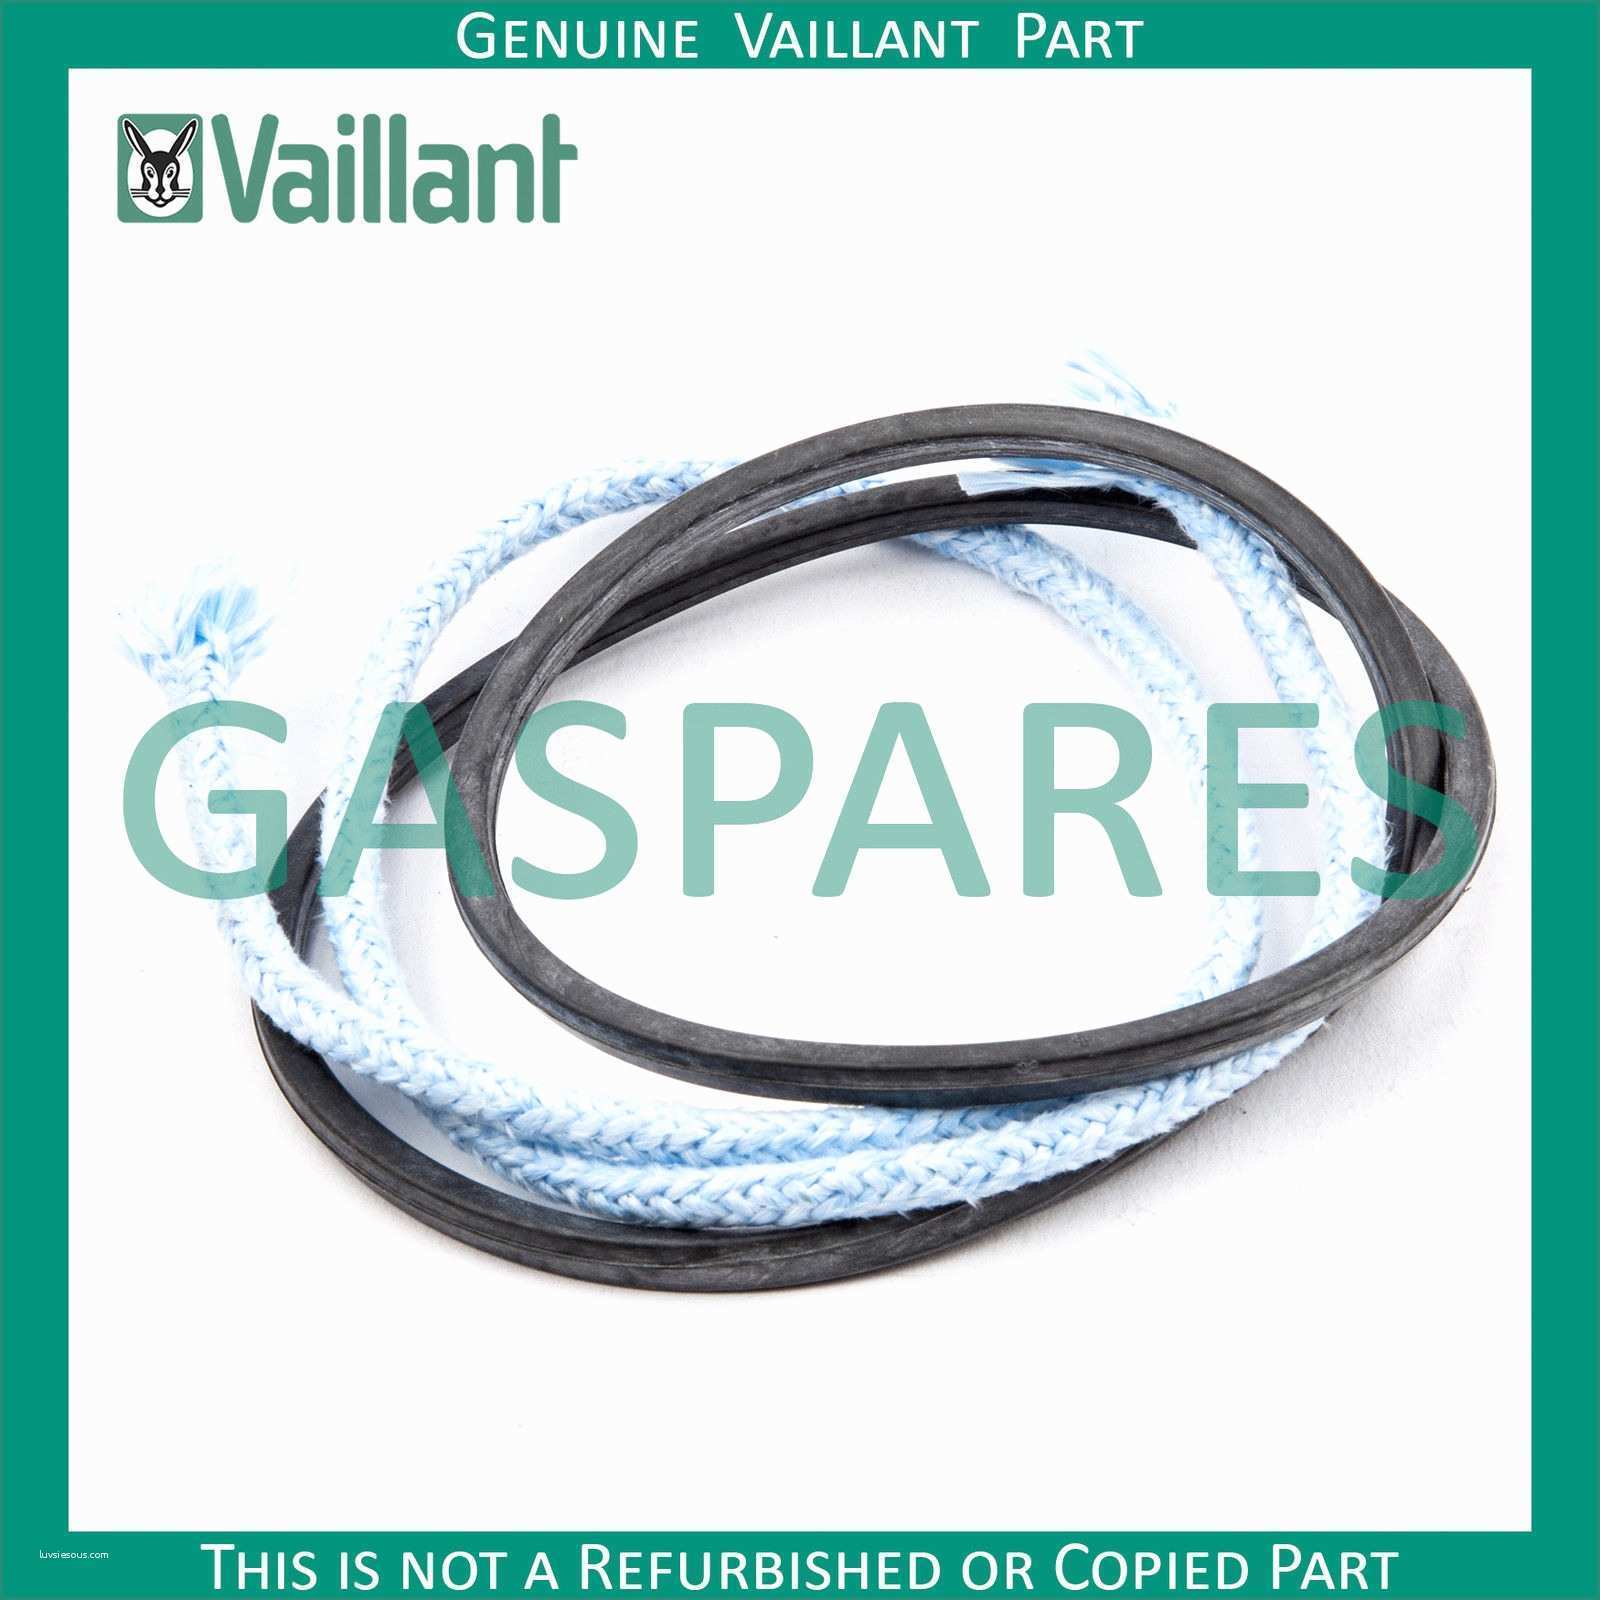 Manuale Caldaia Vaillant E Vaillant Gas Spare Part Burner Seal Packing Ring Genuine